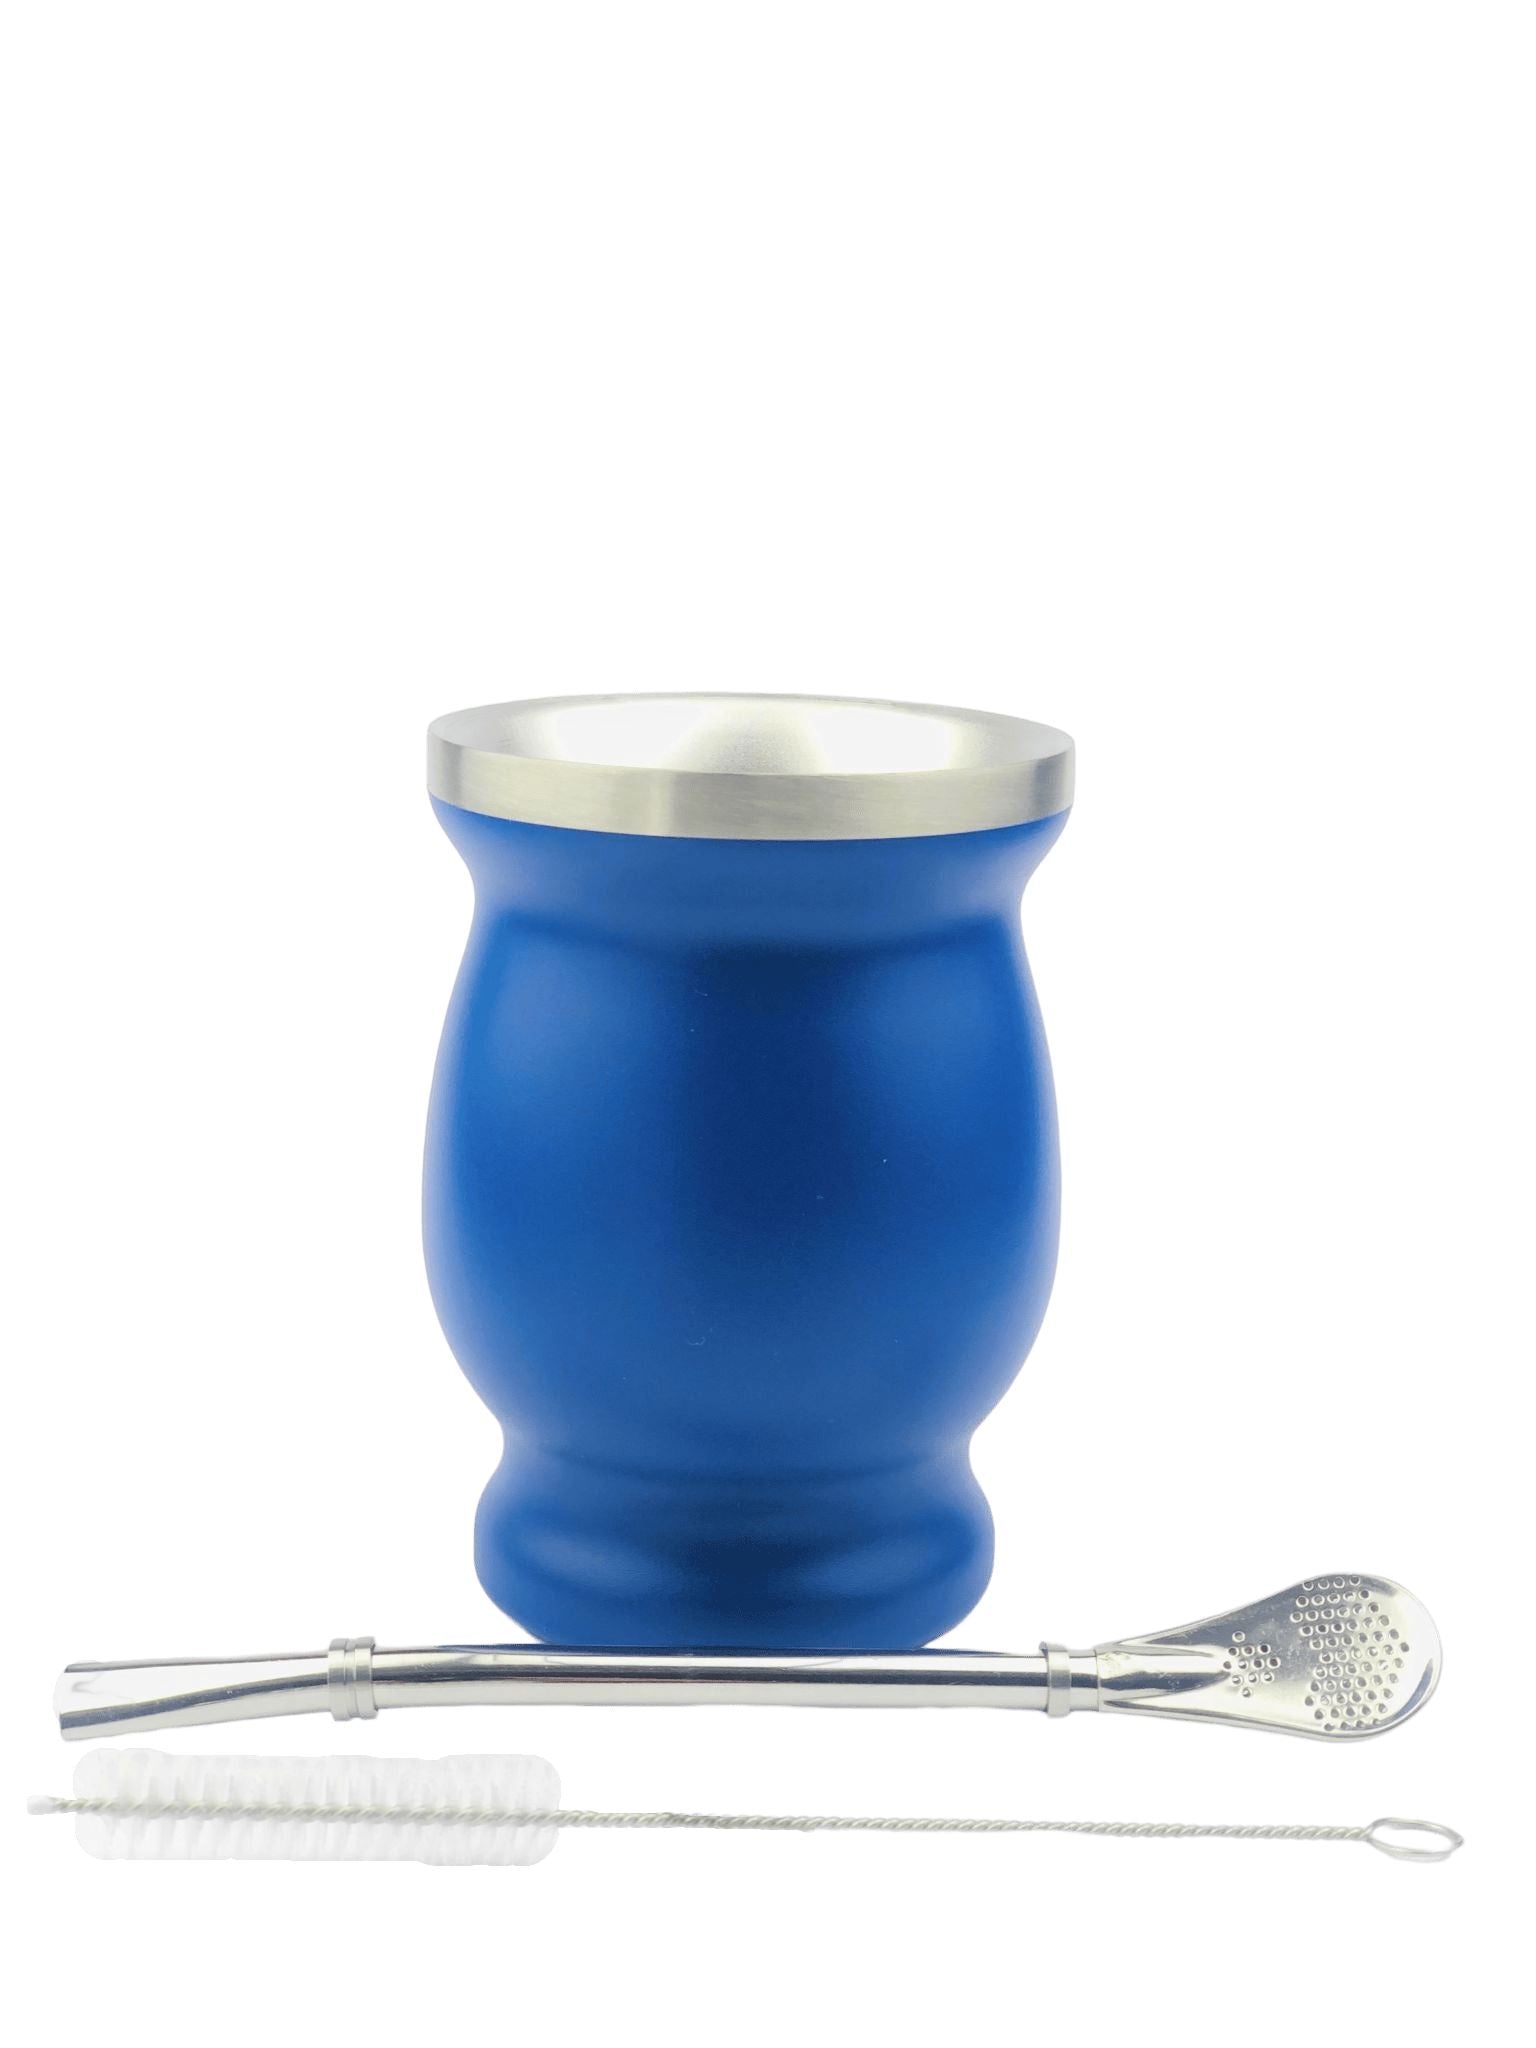 Concavex Mate Gourd and Straw Set - Blue (Mate and bombilla) Mates Hispanic Pantry 